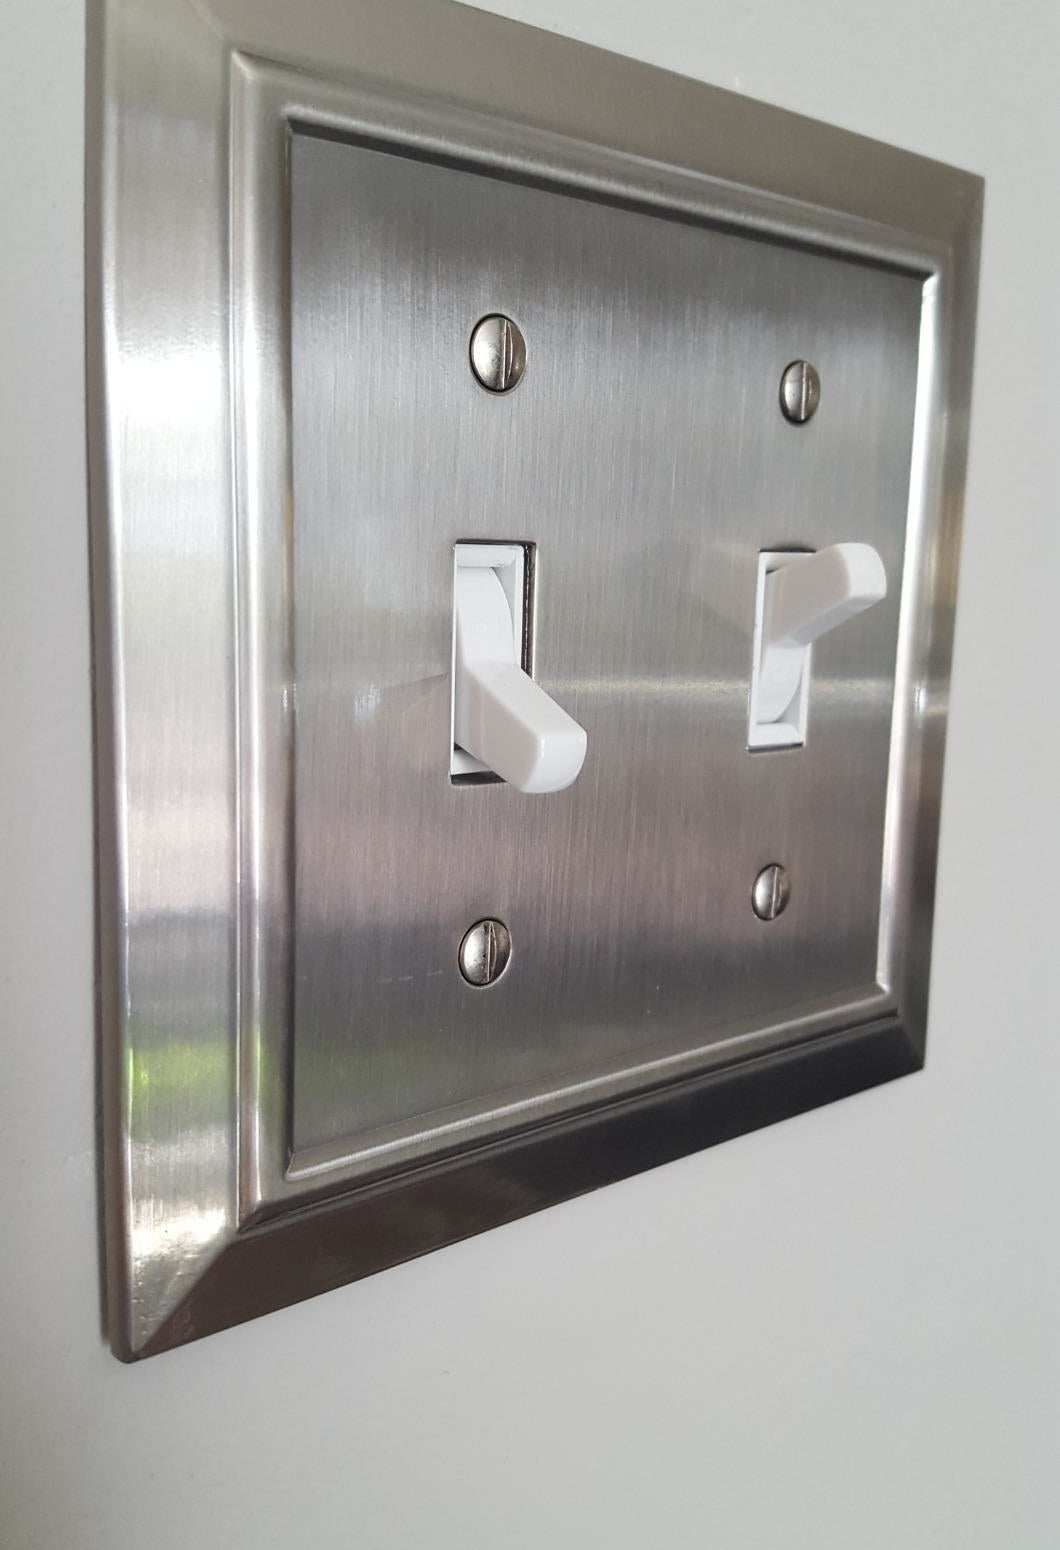 The silver-plated light switch cover